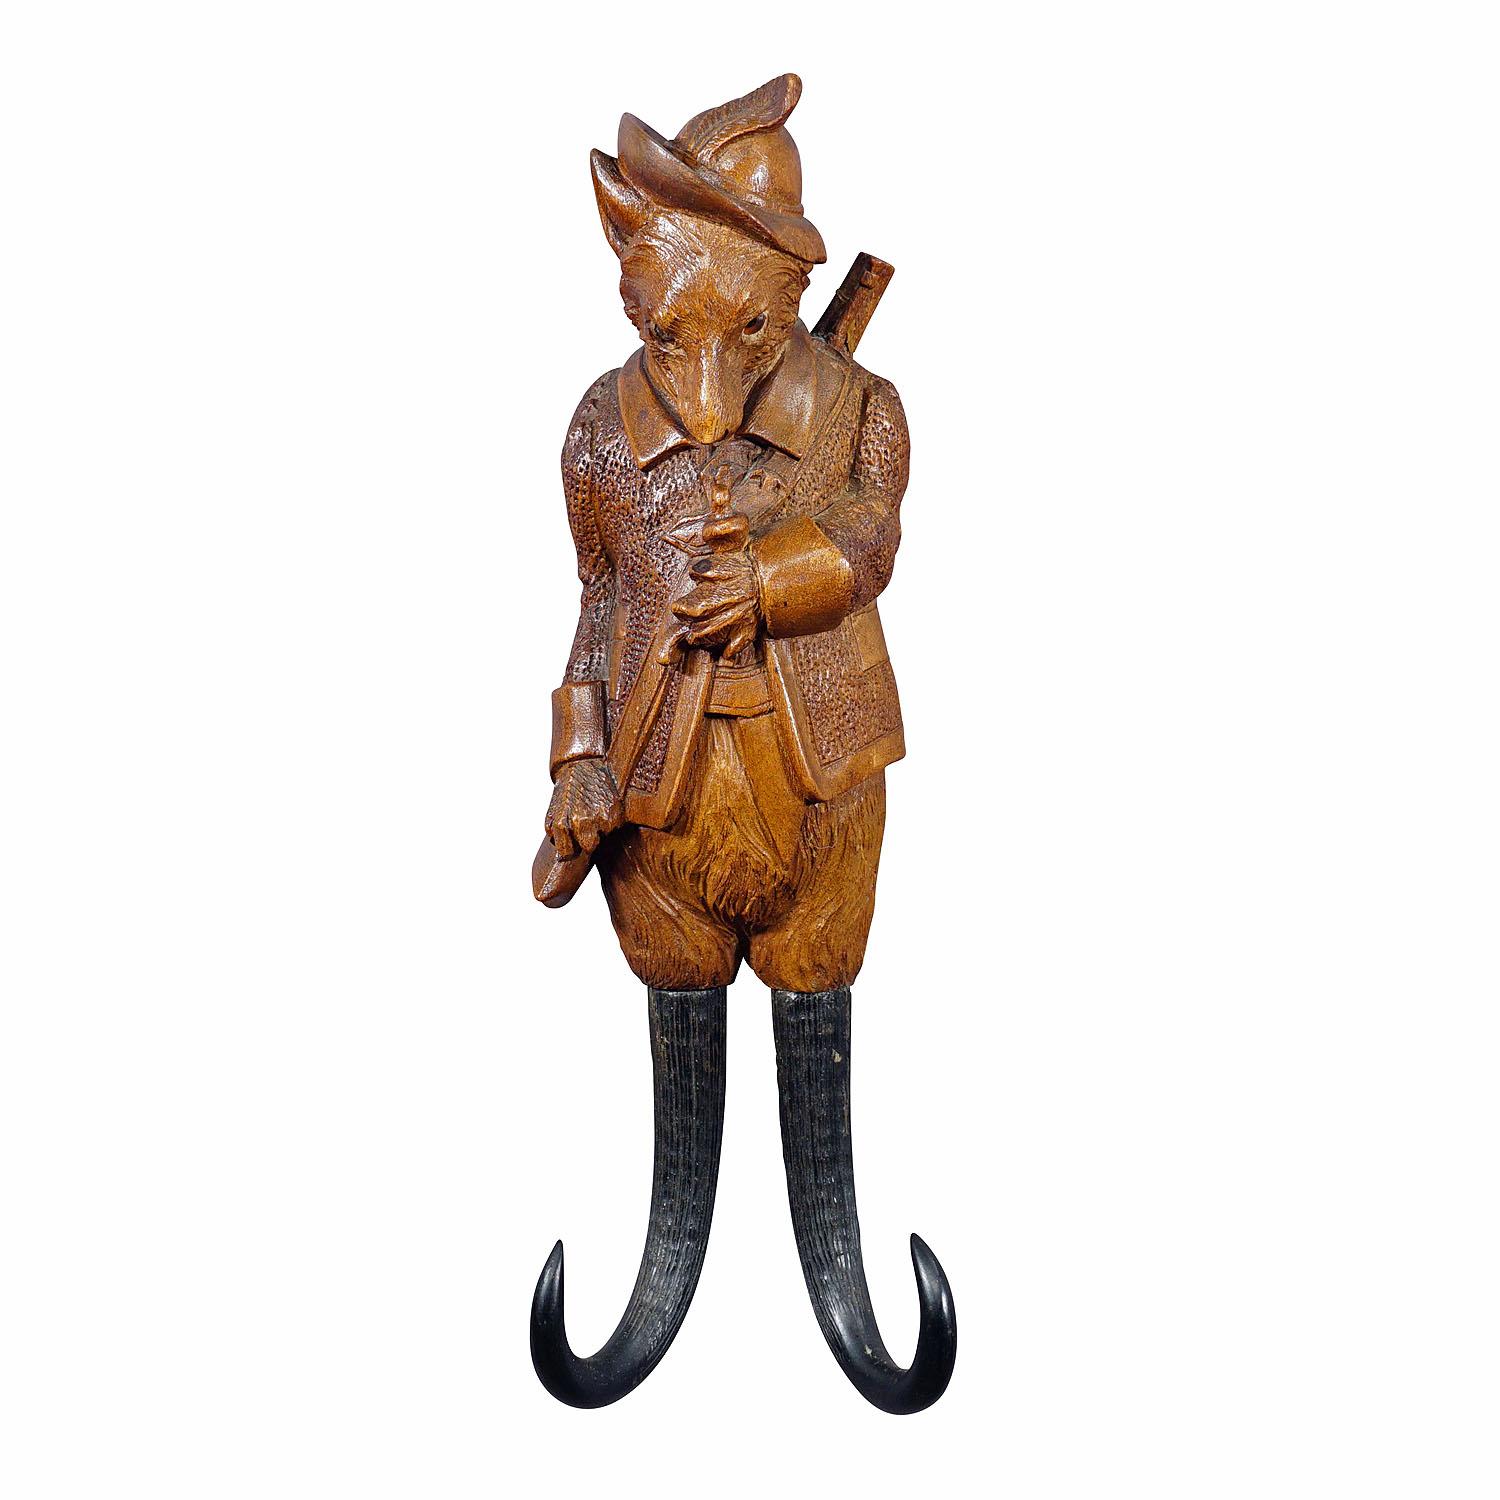 Black Forest Carved Fox Whip Holder or Wall Hook

A handcarved cabin decor style coat hook or whip holder showing a fox with a gun. With genuine chamois antlers as hooks. Handcarved in Brienz, Switzerland around 1900.

The tradition of wood carving